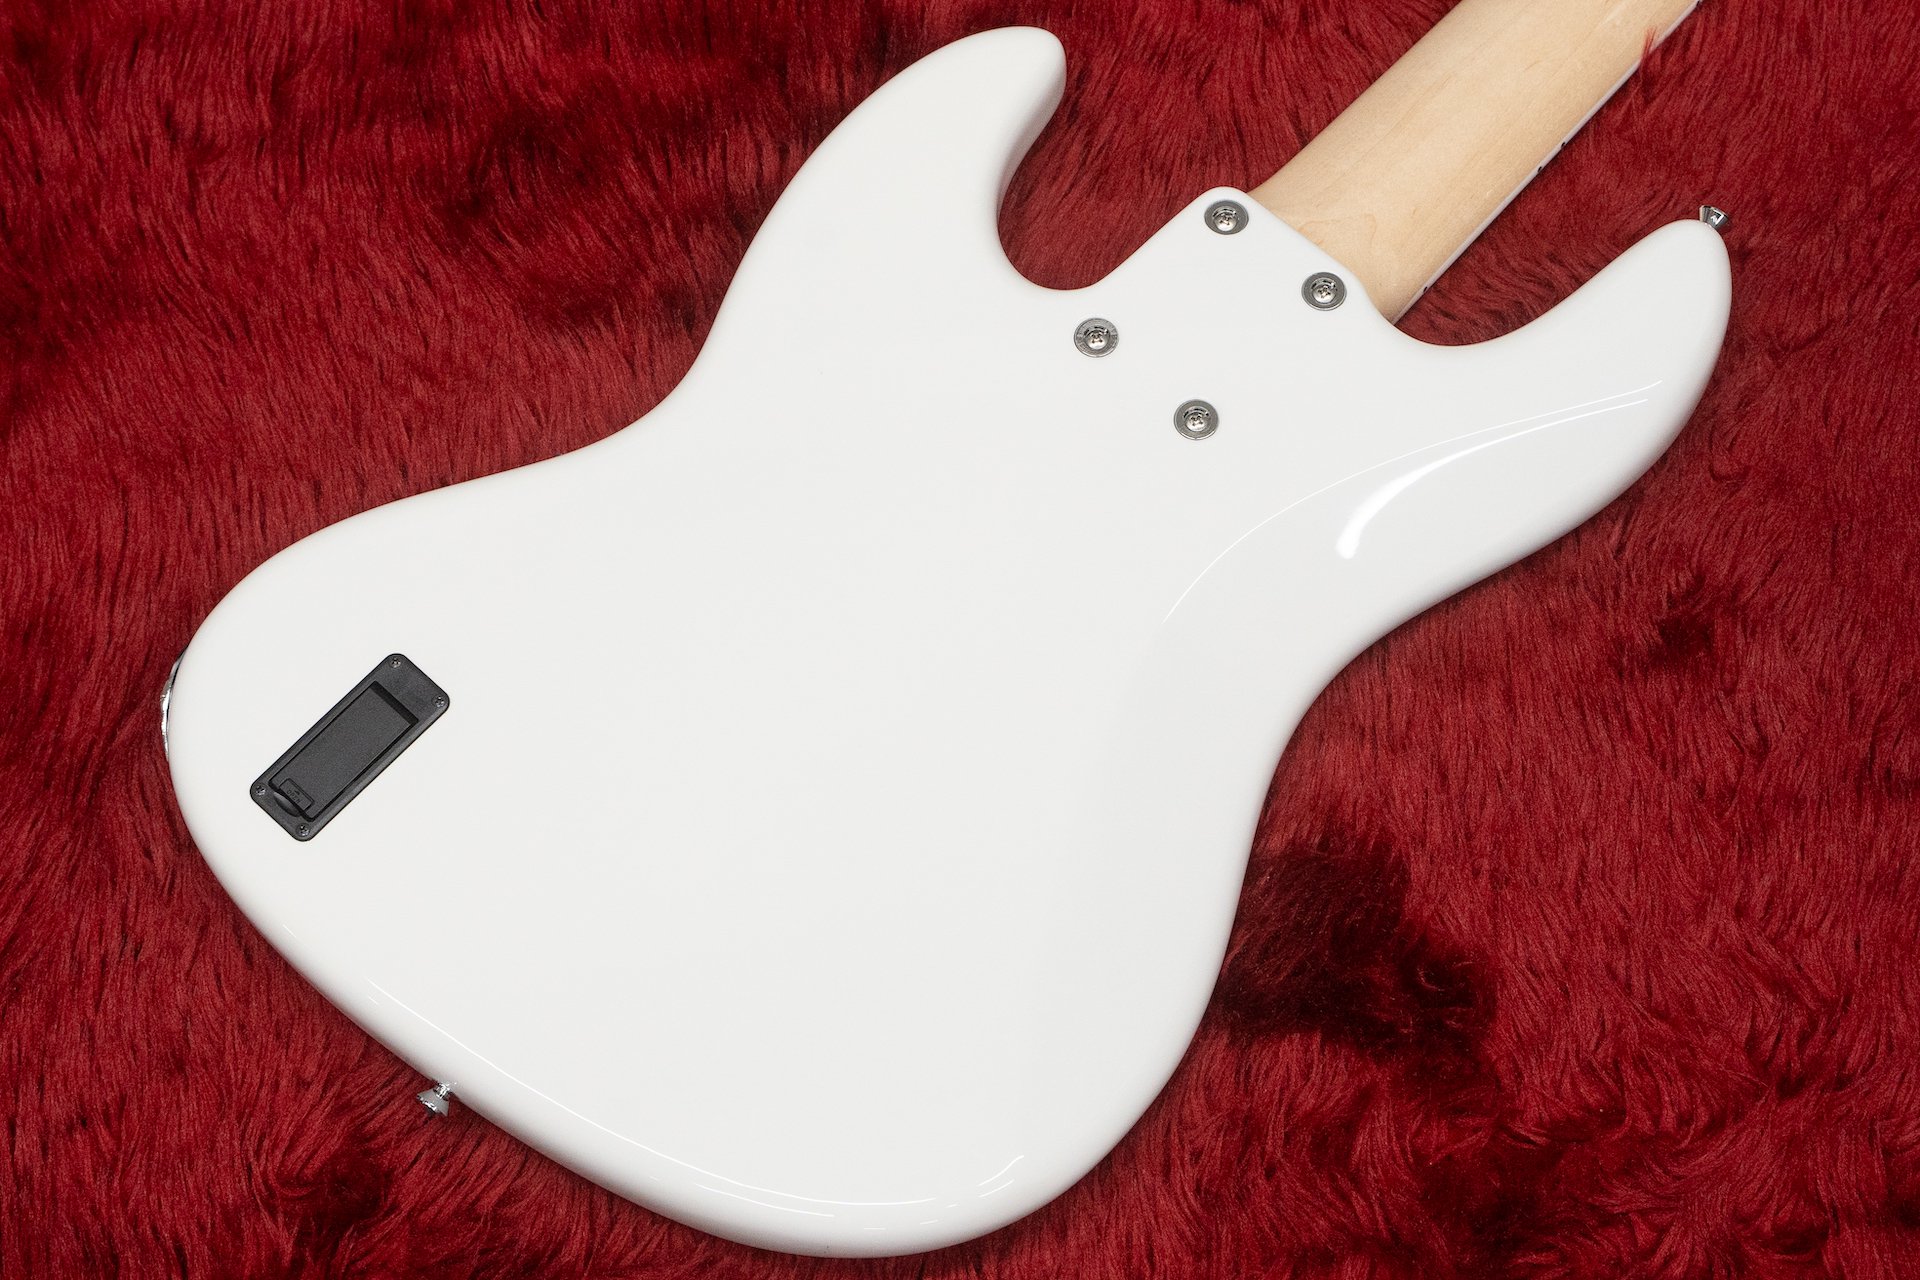 new】Xotic Bass / XJ-Core 5st Olympic White/Alder/R/MH/XTCT #23004 